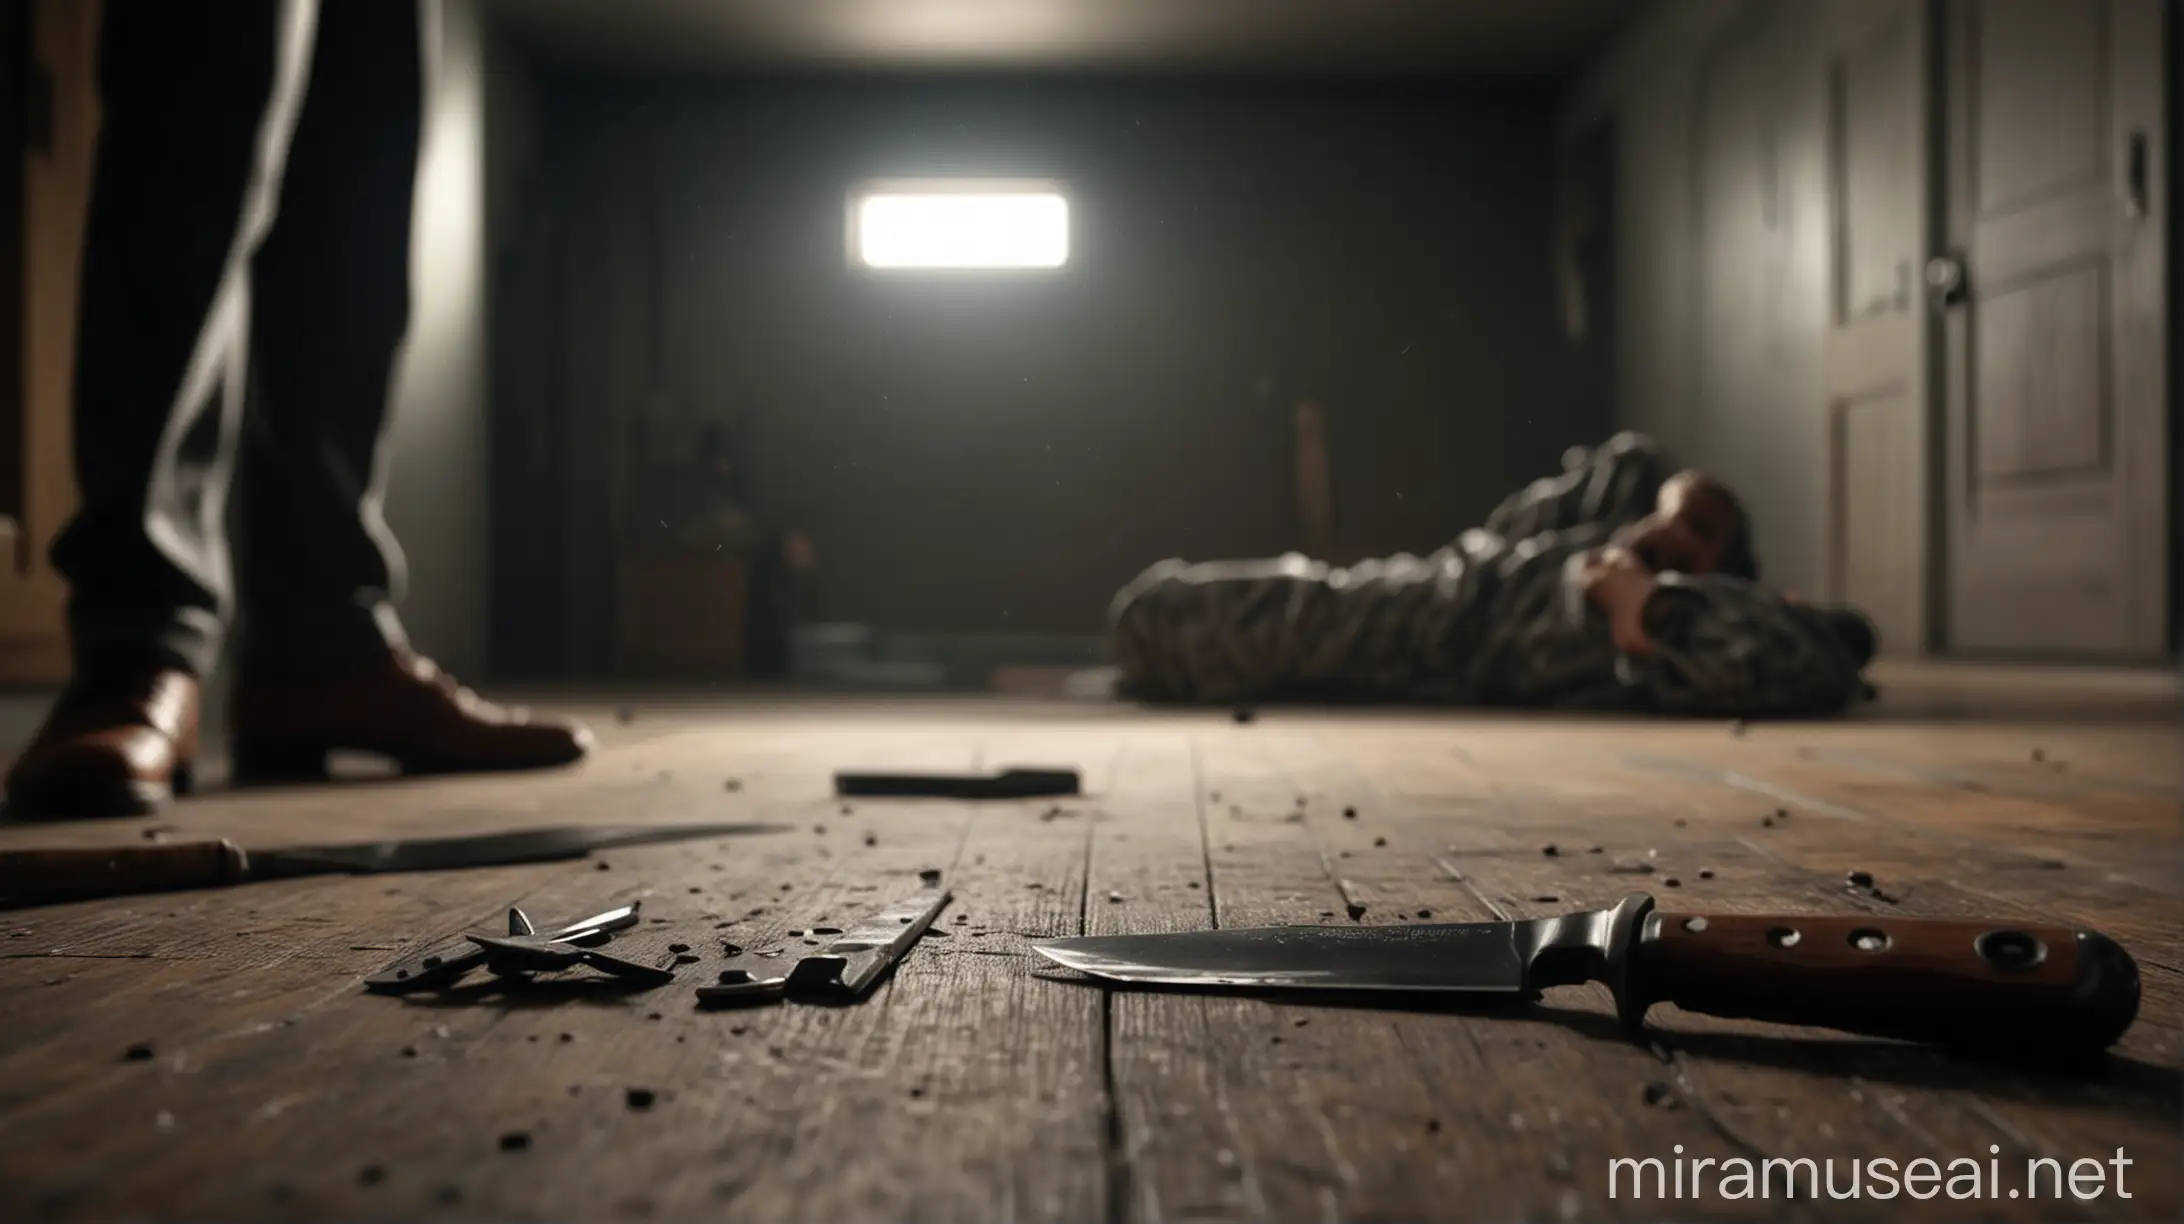 realistic ai image: focus on sharp knife, one man laying on floor in background, dark room, long shot, detailed